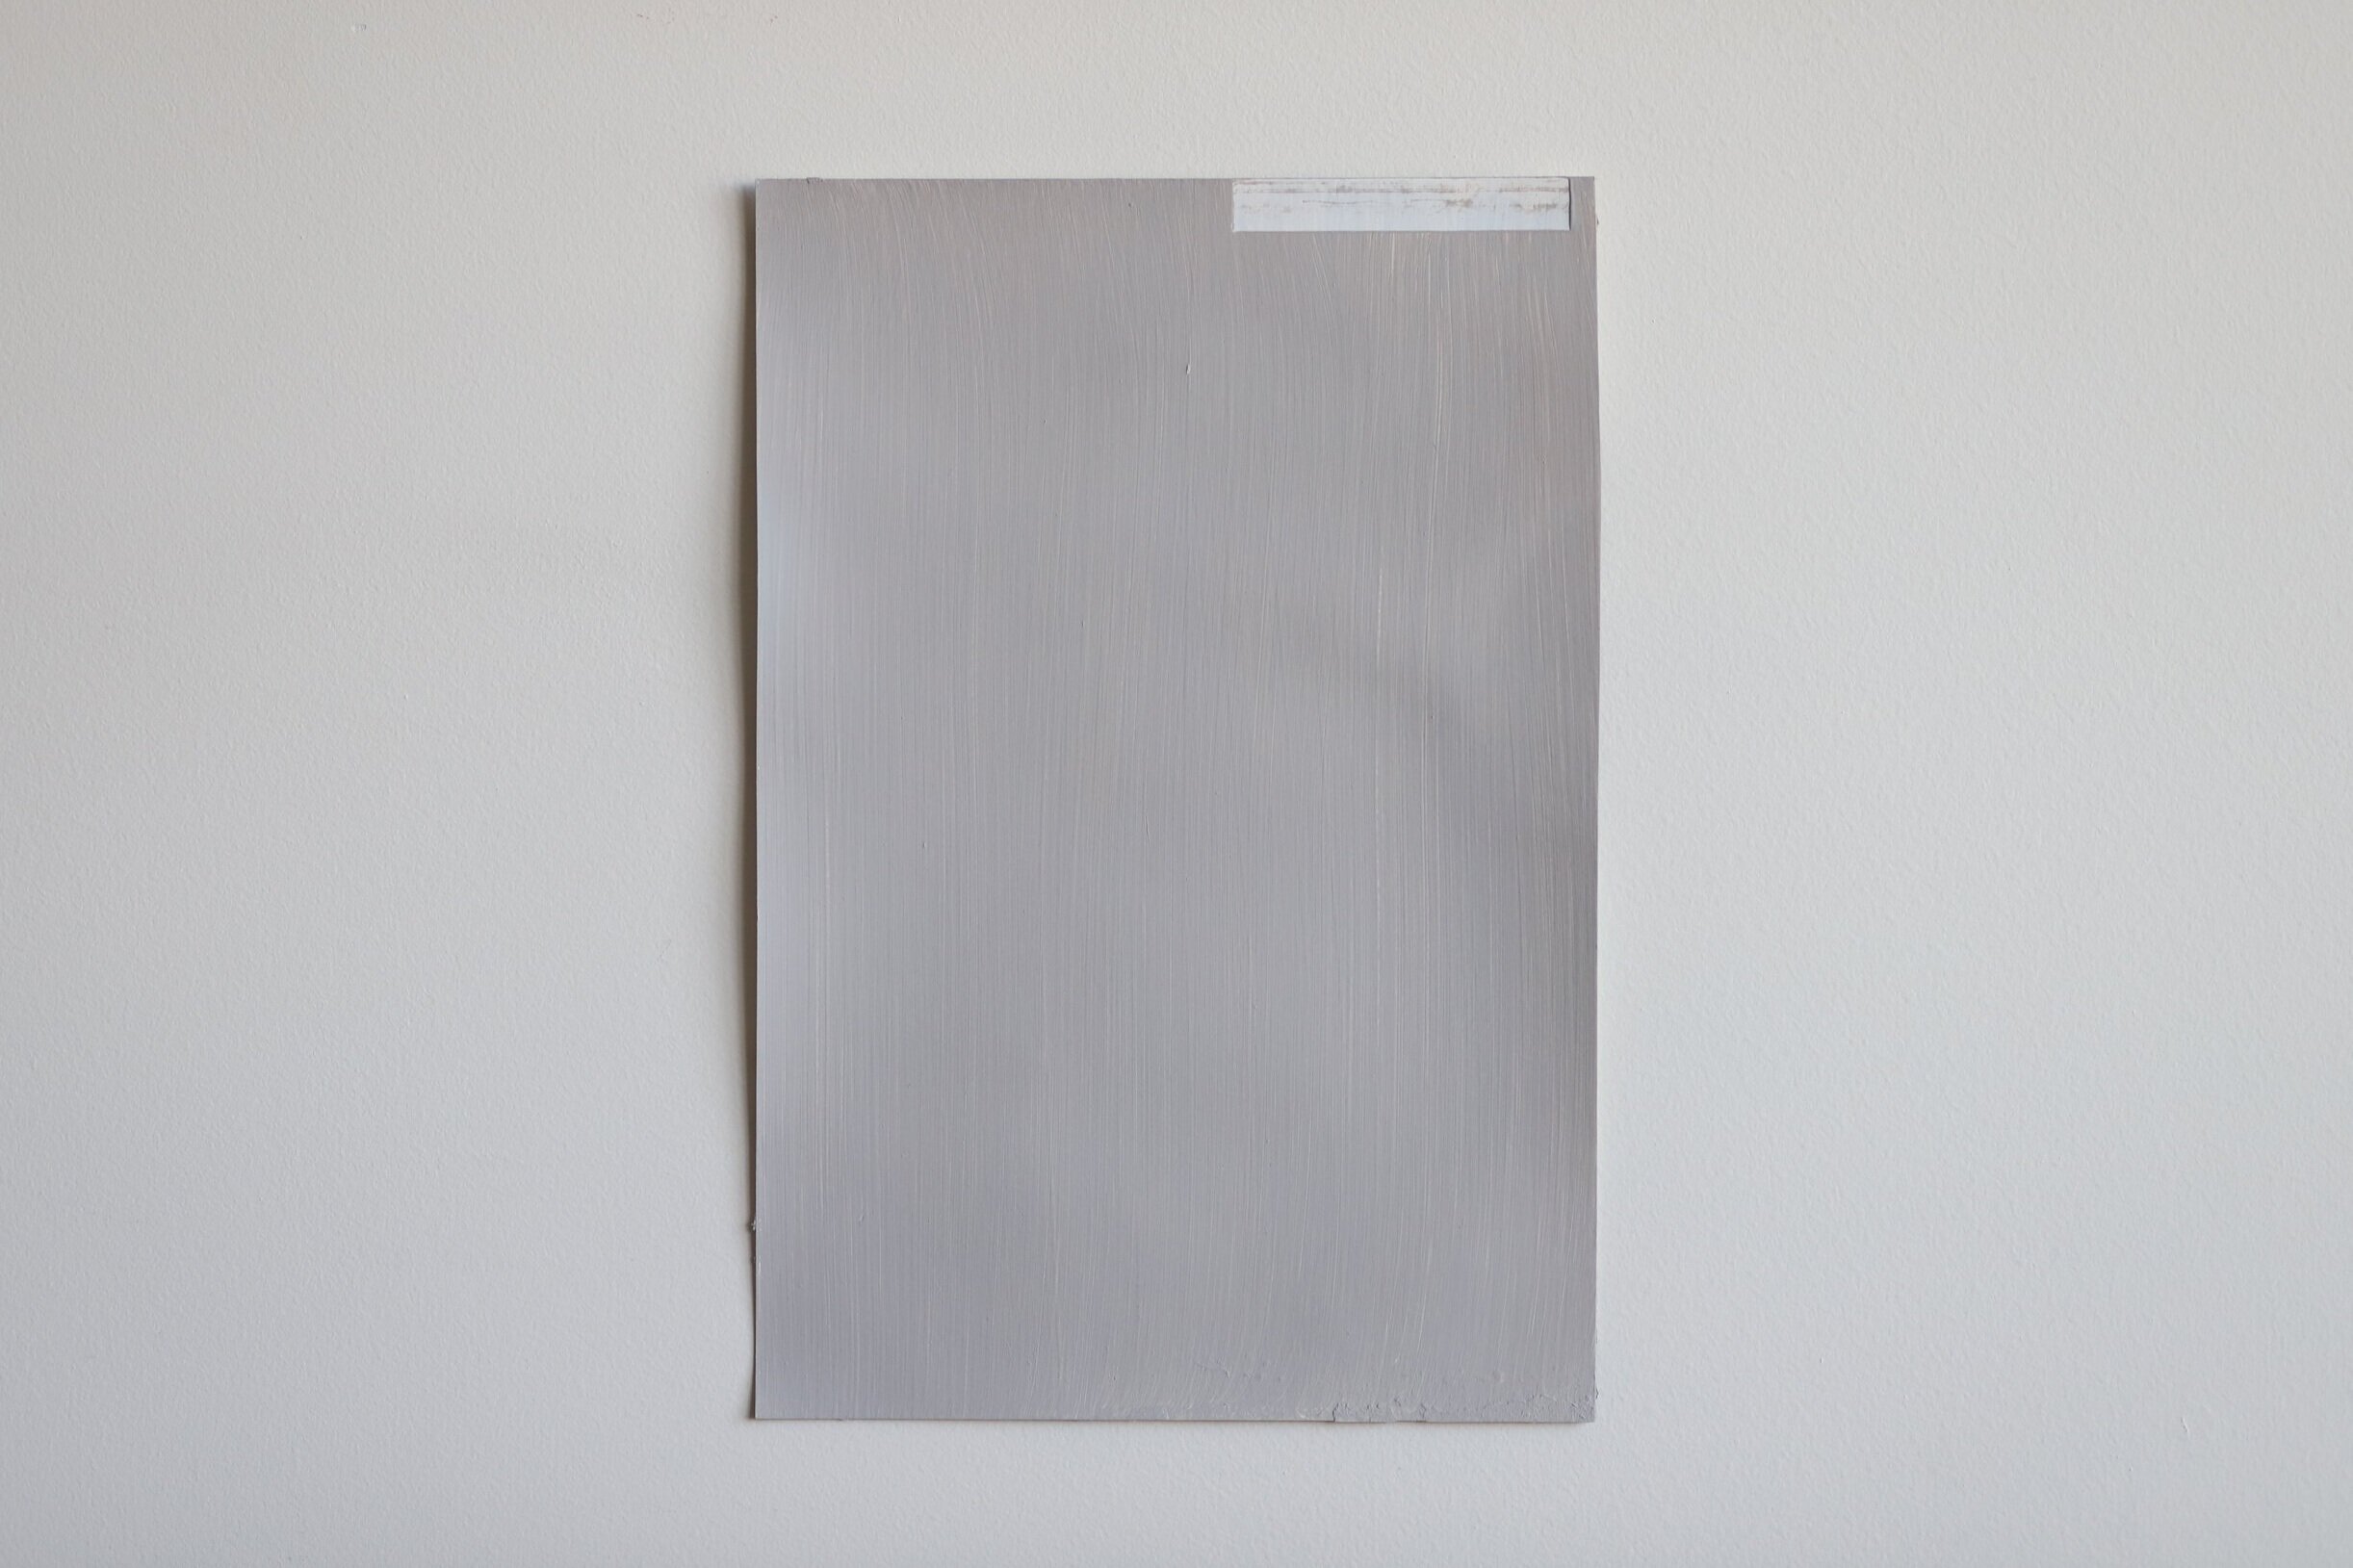  Untitled, gesso on paper, 31x21cm, 2018-2020 